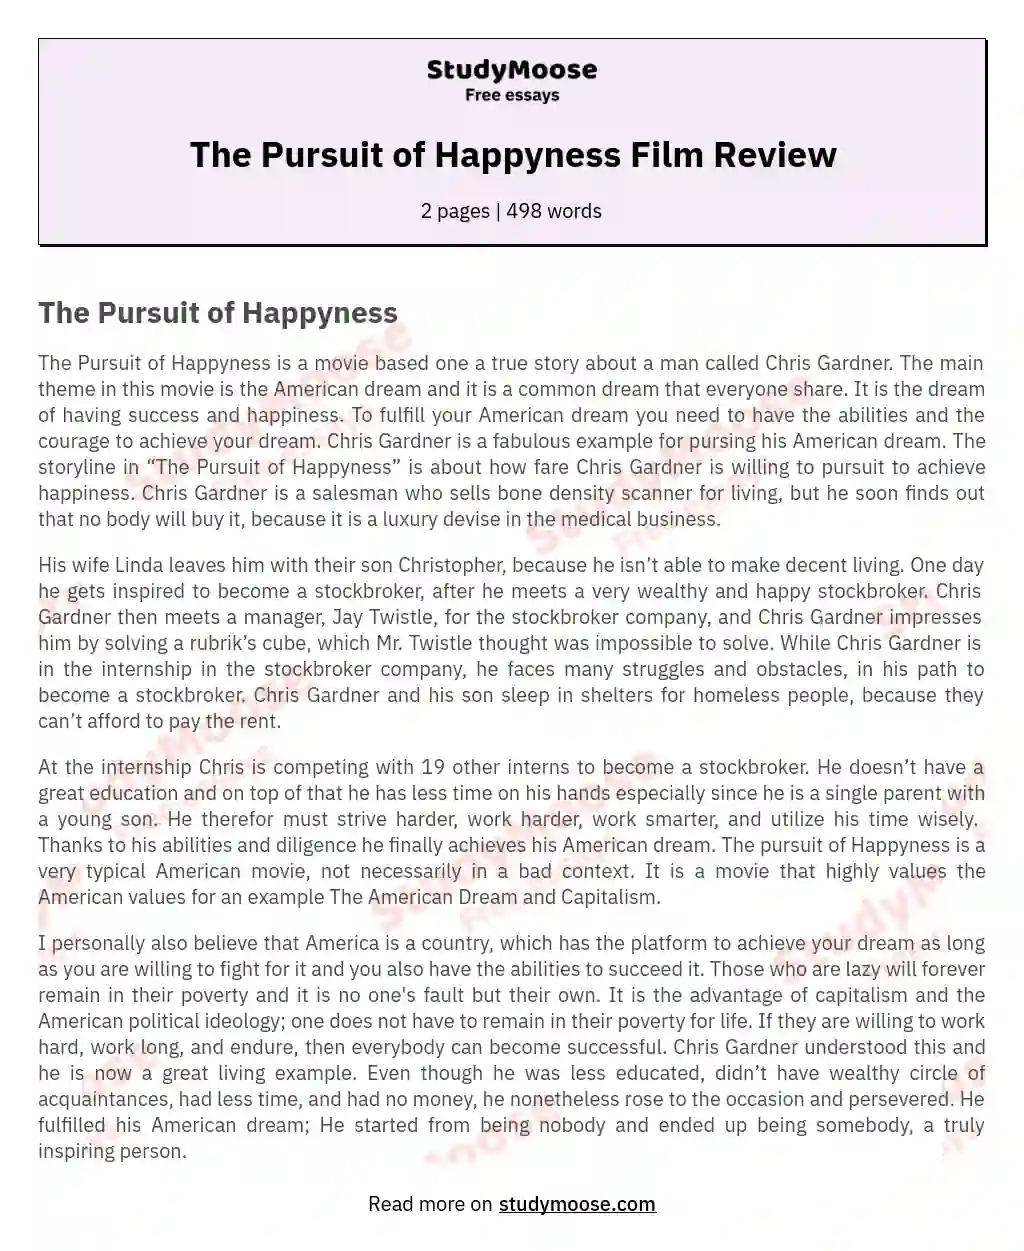 The Pursuit of Happyness Film Review essay